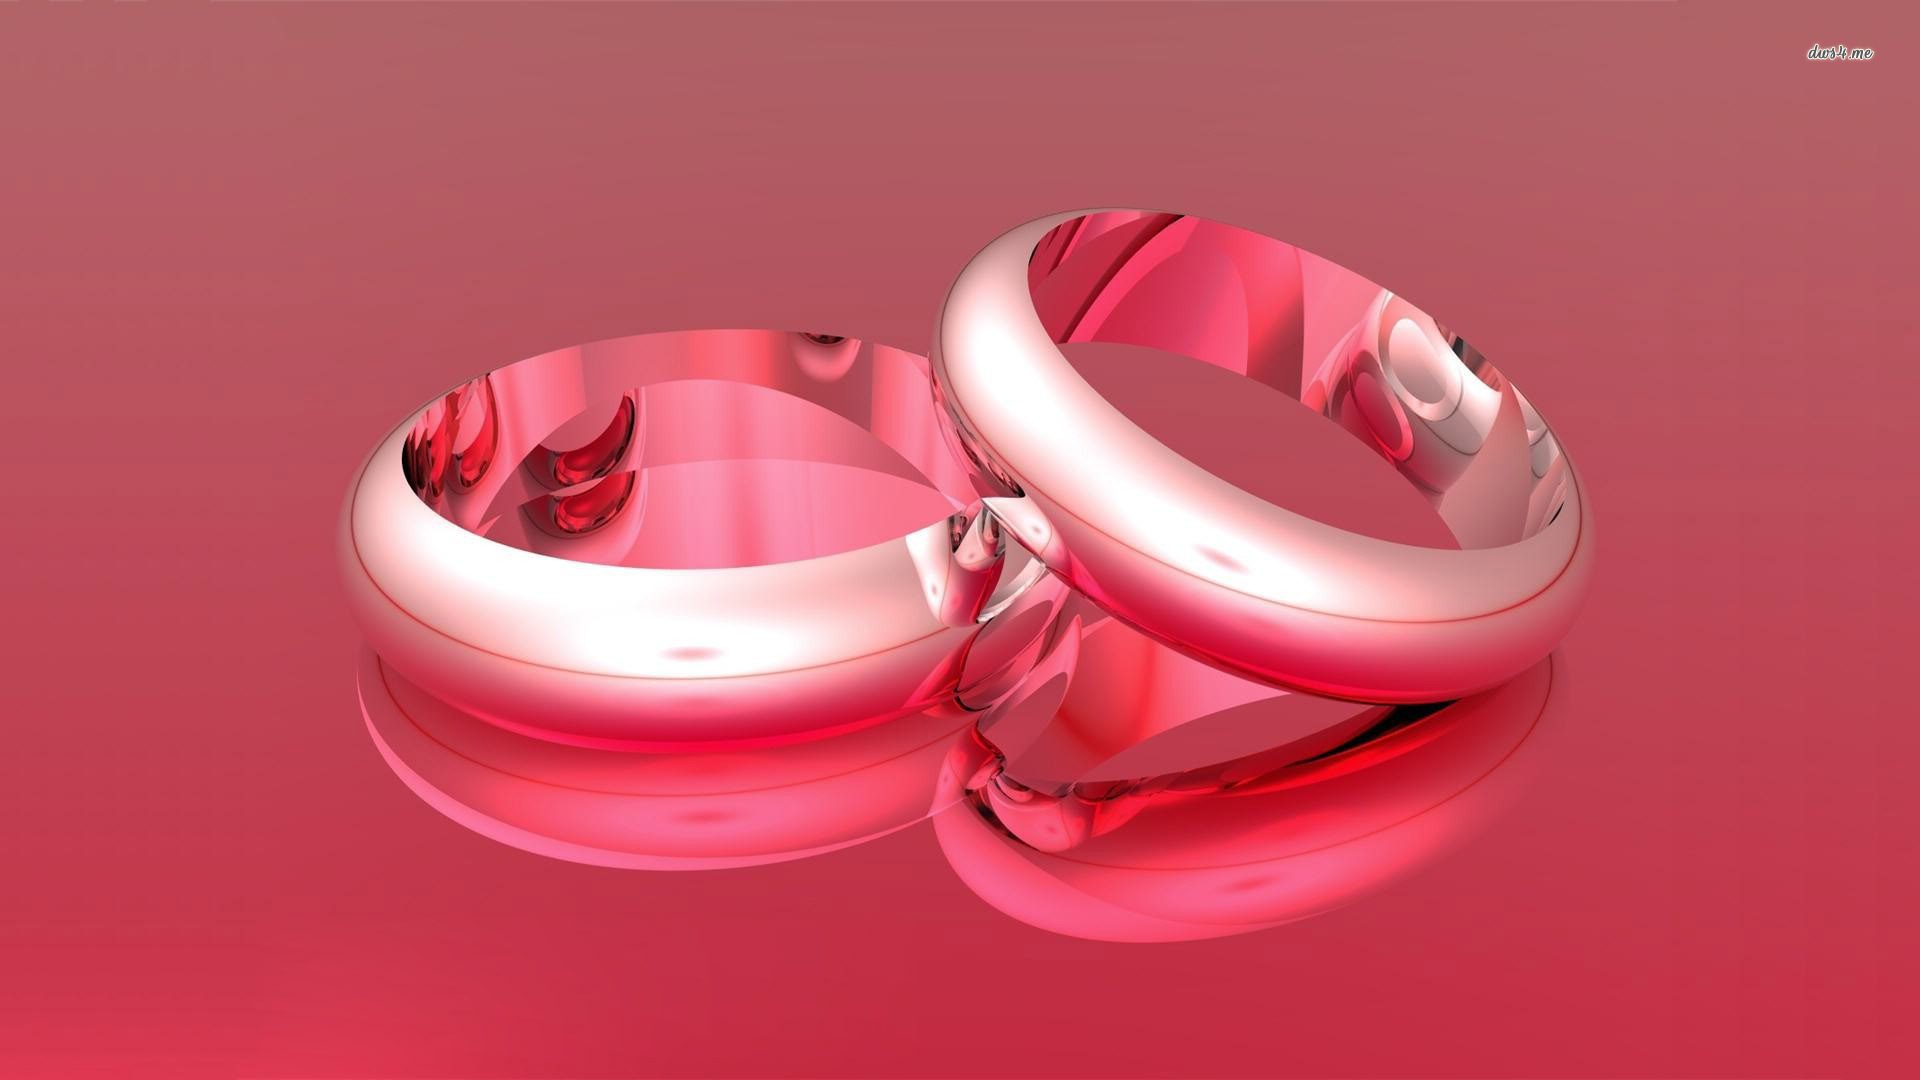 ring wallpaper hd,ring,pink,product,fashion accessory,wedding ring